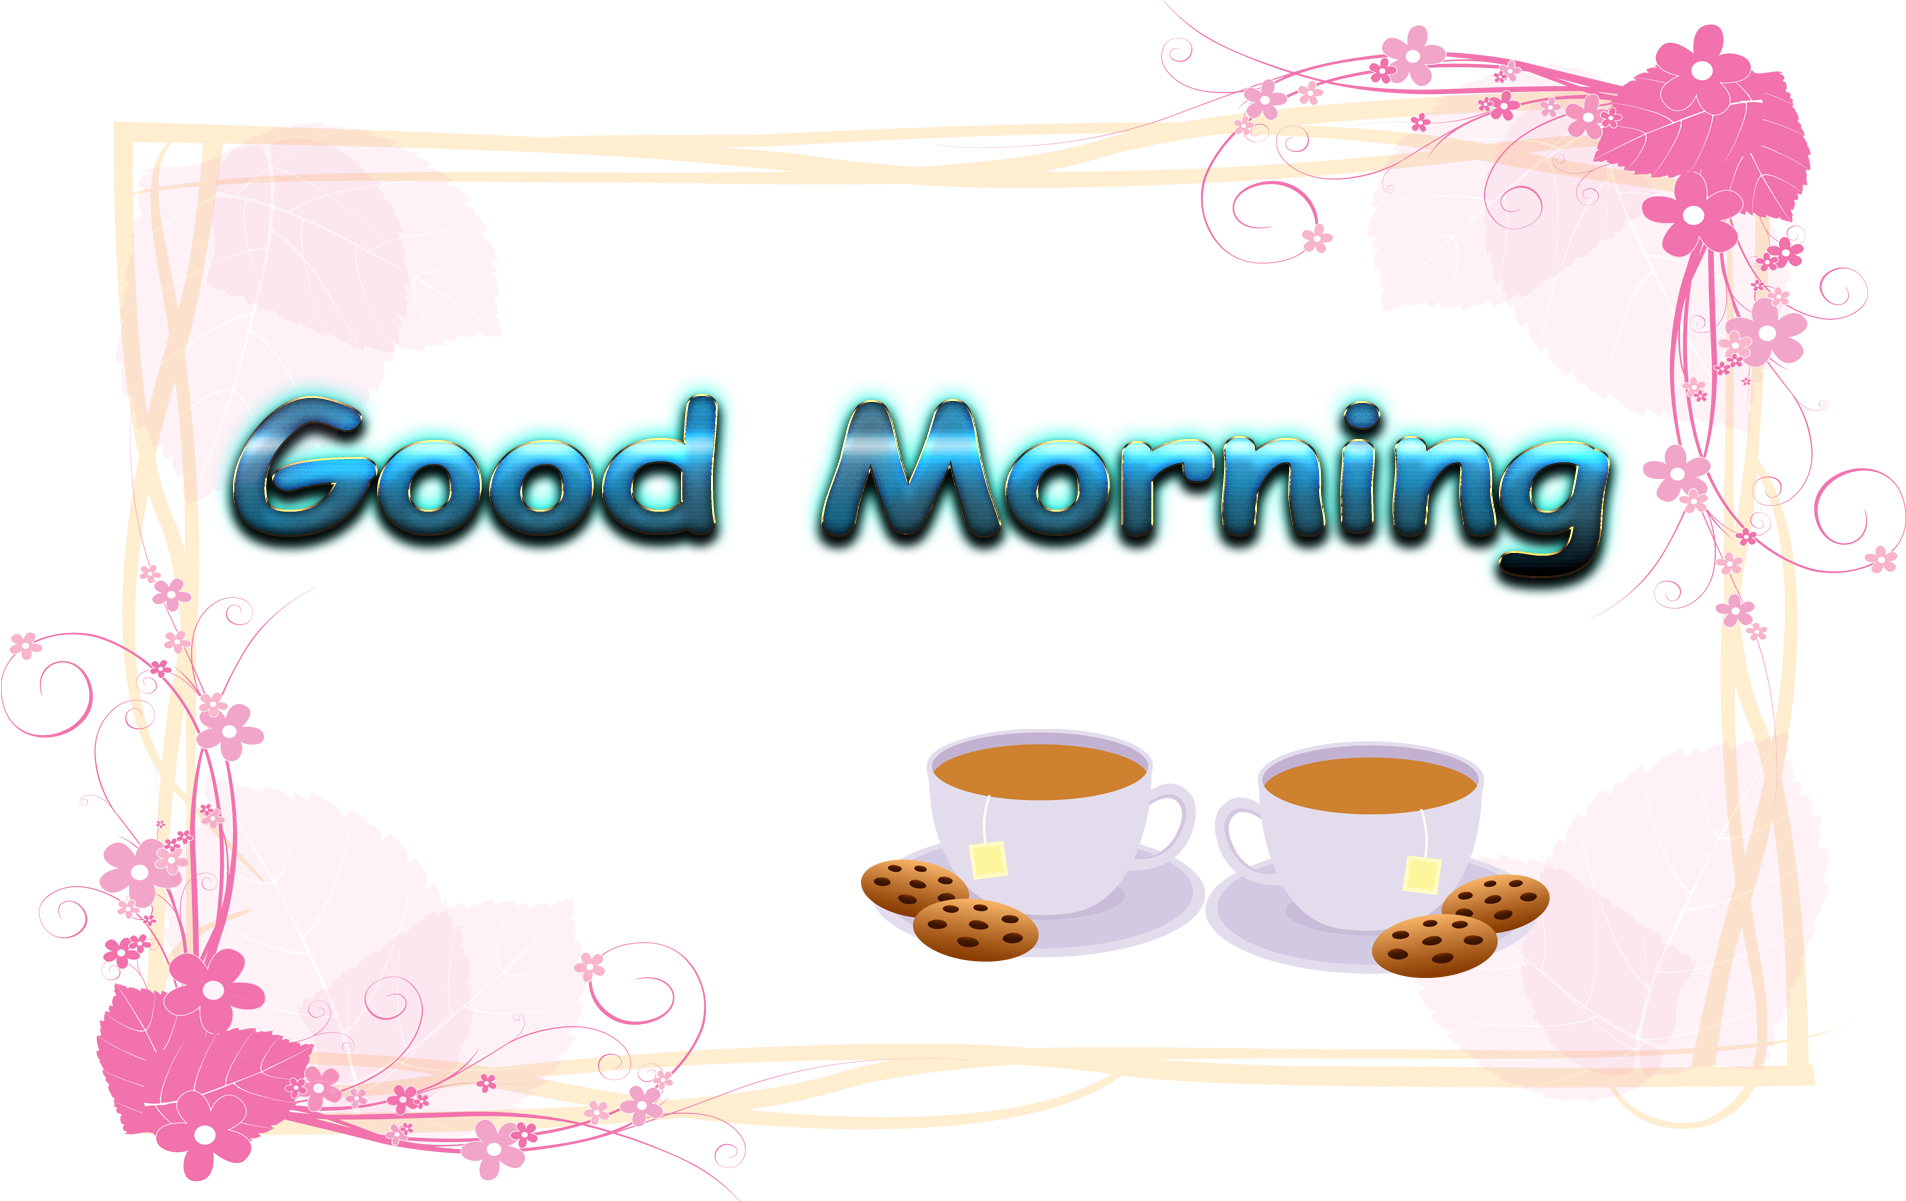 Good Morning Greetingwith Coffeeand Cookies PNG